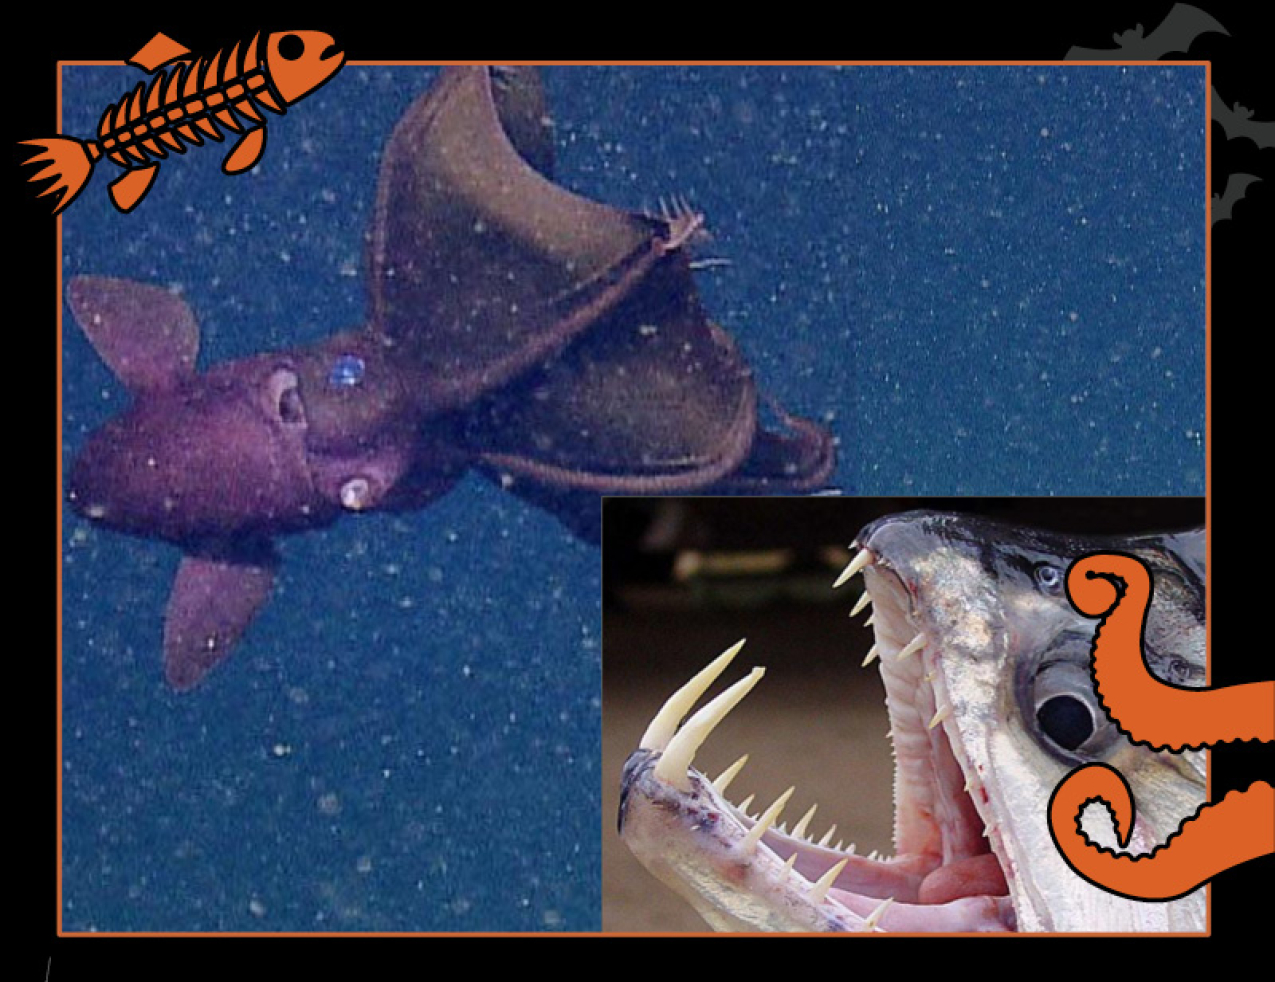 A fish with large bottom fangs and sharp long teeth. A vampire squid swims in cloudy, speckled water. Border of the photo is black with orange sea creature graphics of octopus tentacles and a fish skeleton. Text: Underwater “vampires,” #NOAASpookyScience with NOAA logo.